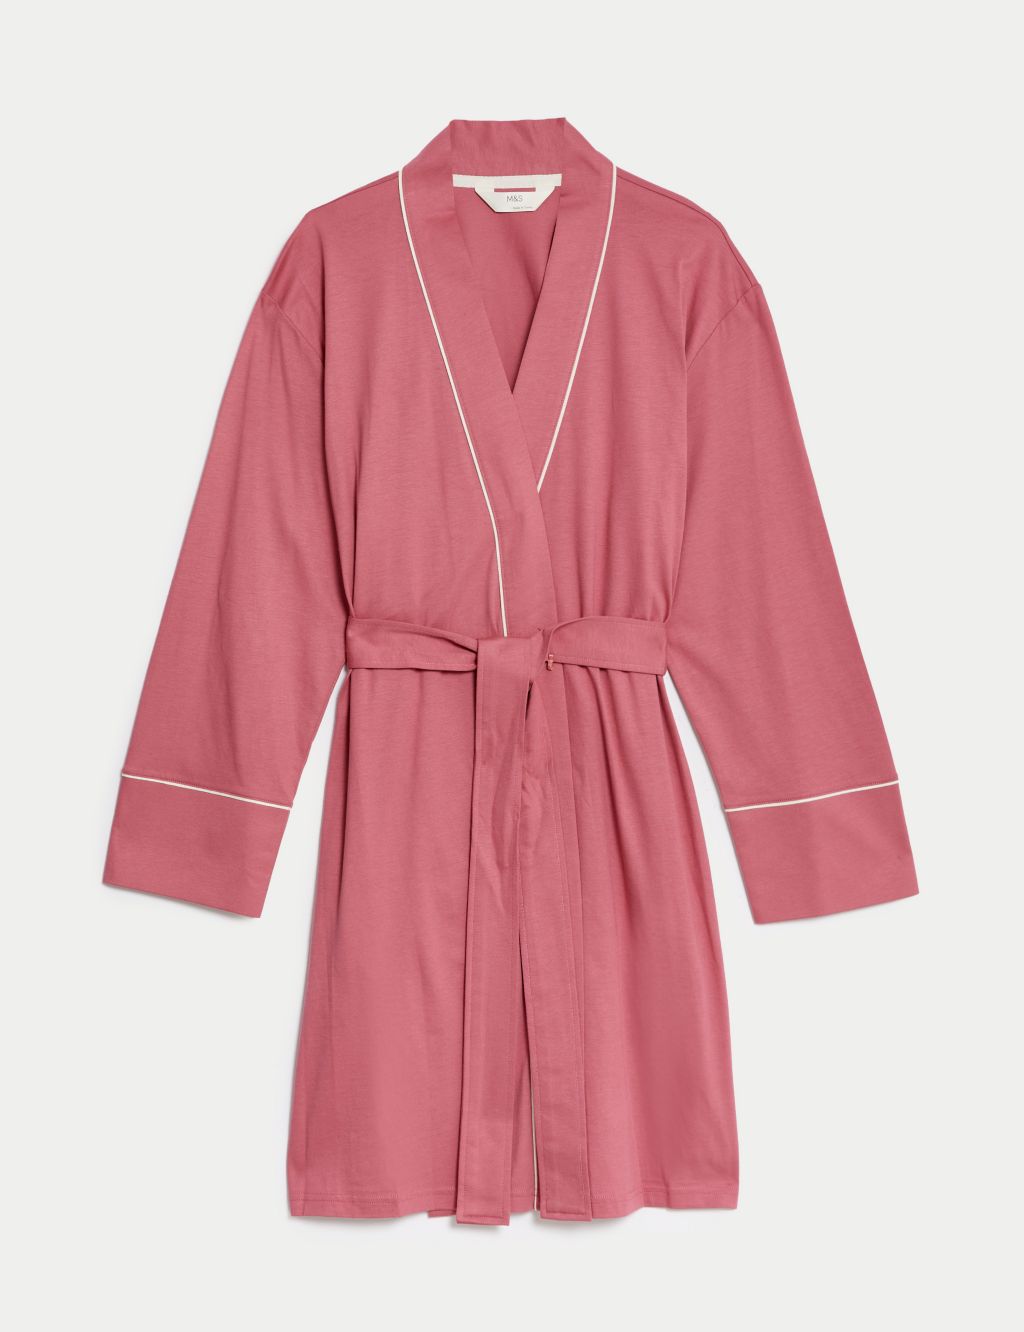 Short Dressing Gown image 2